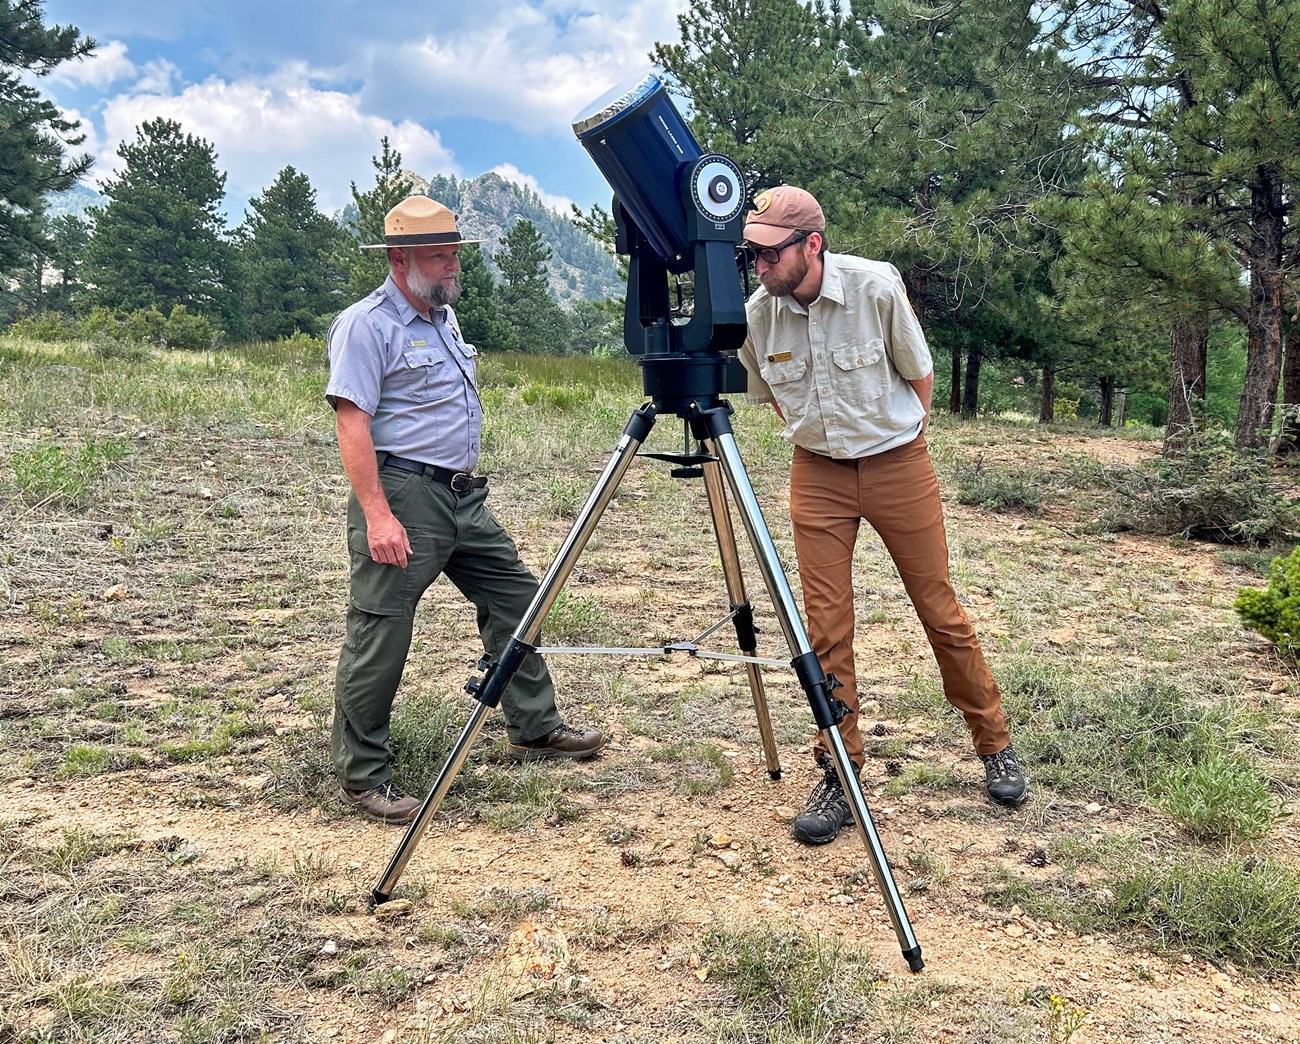 An NPS volunteer is looking through a Solar Telescope and a park ranger is standing next to them